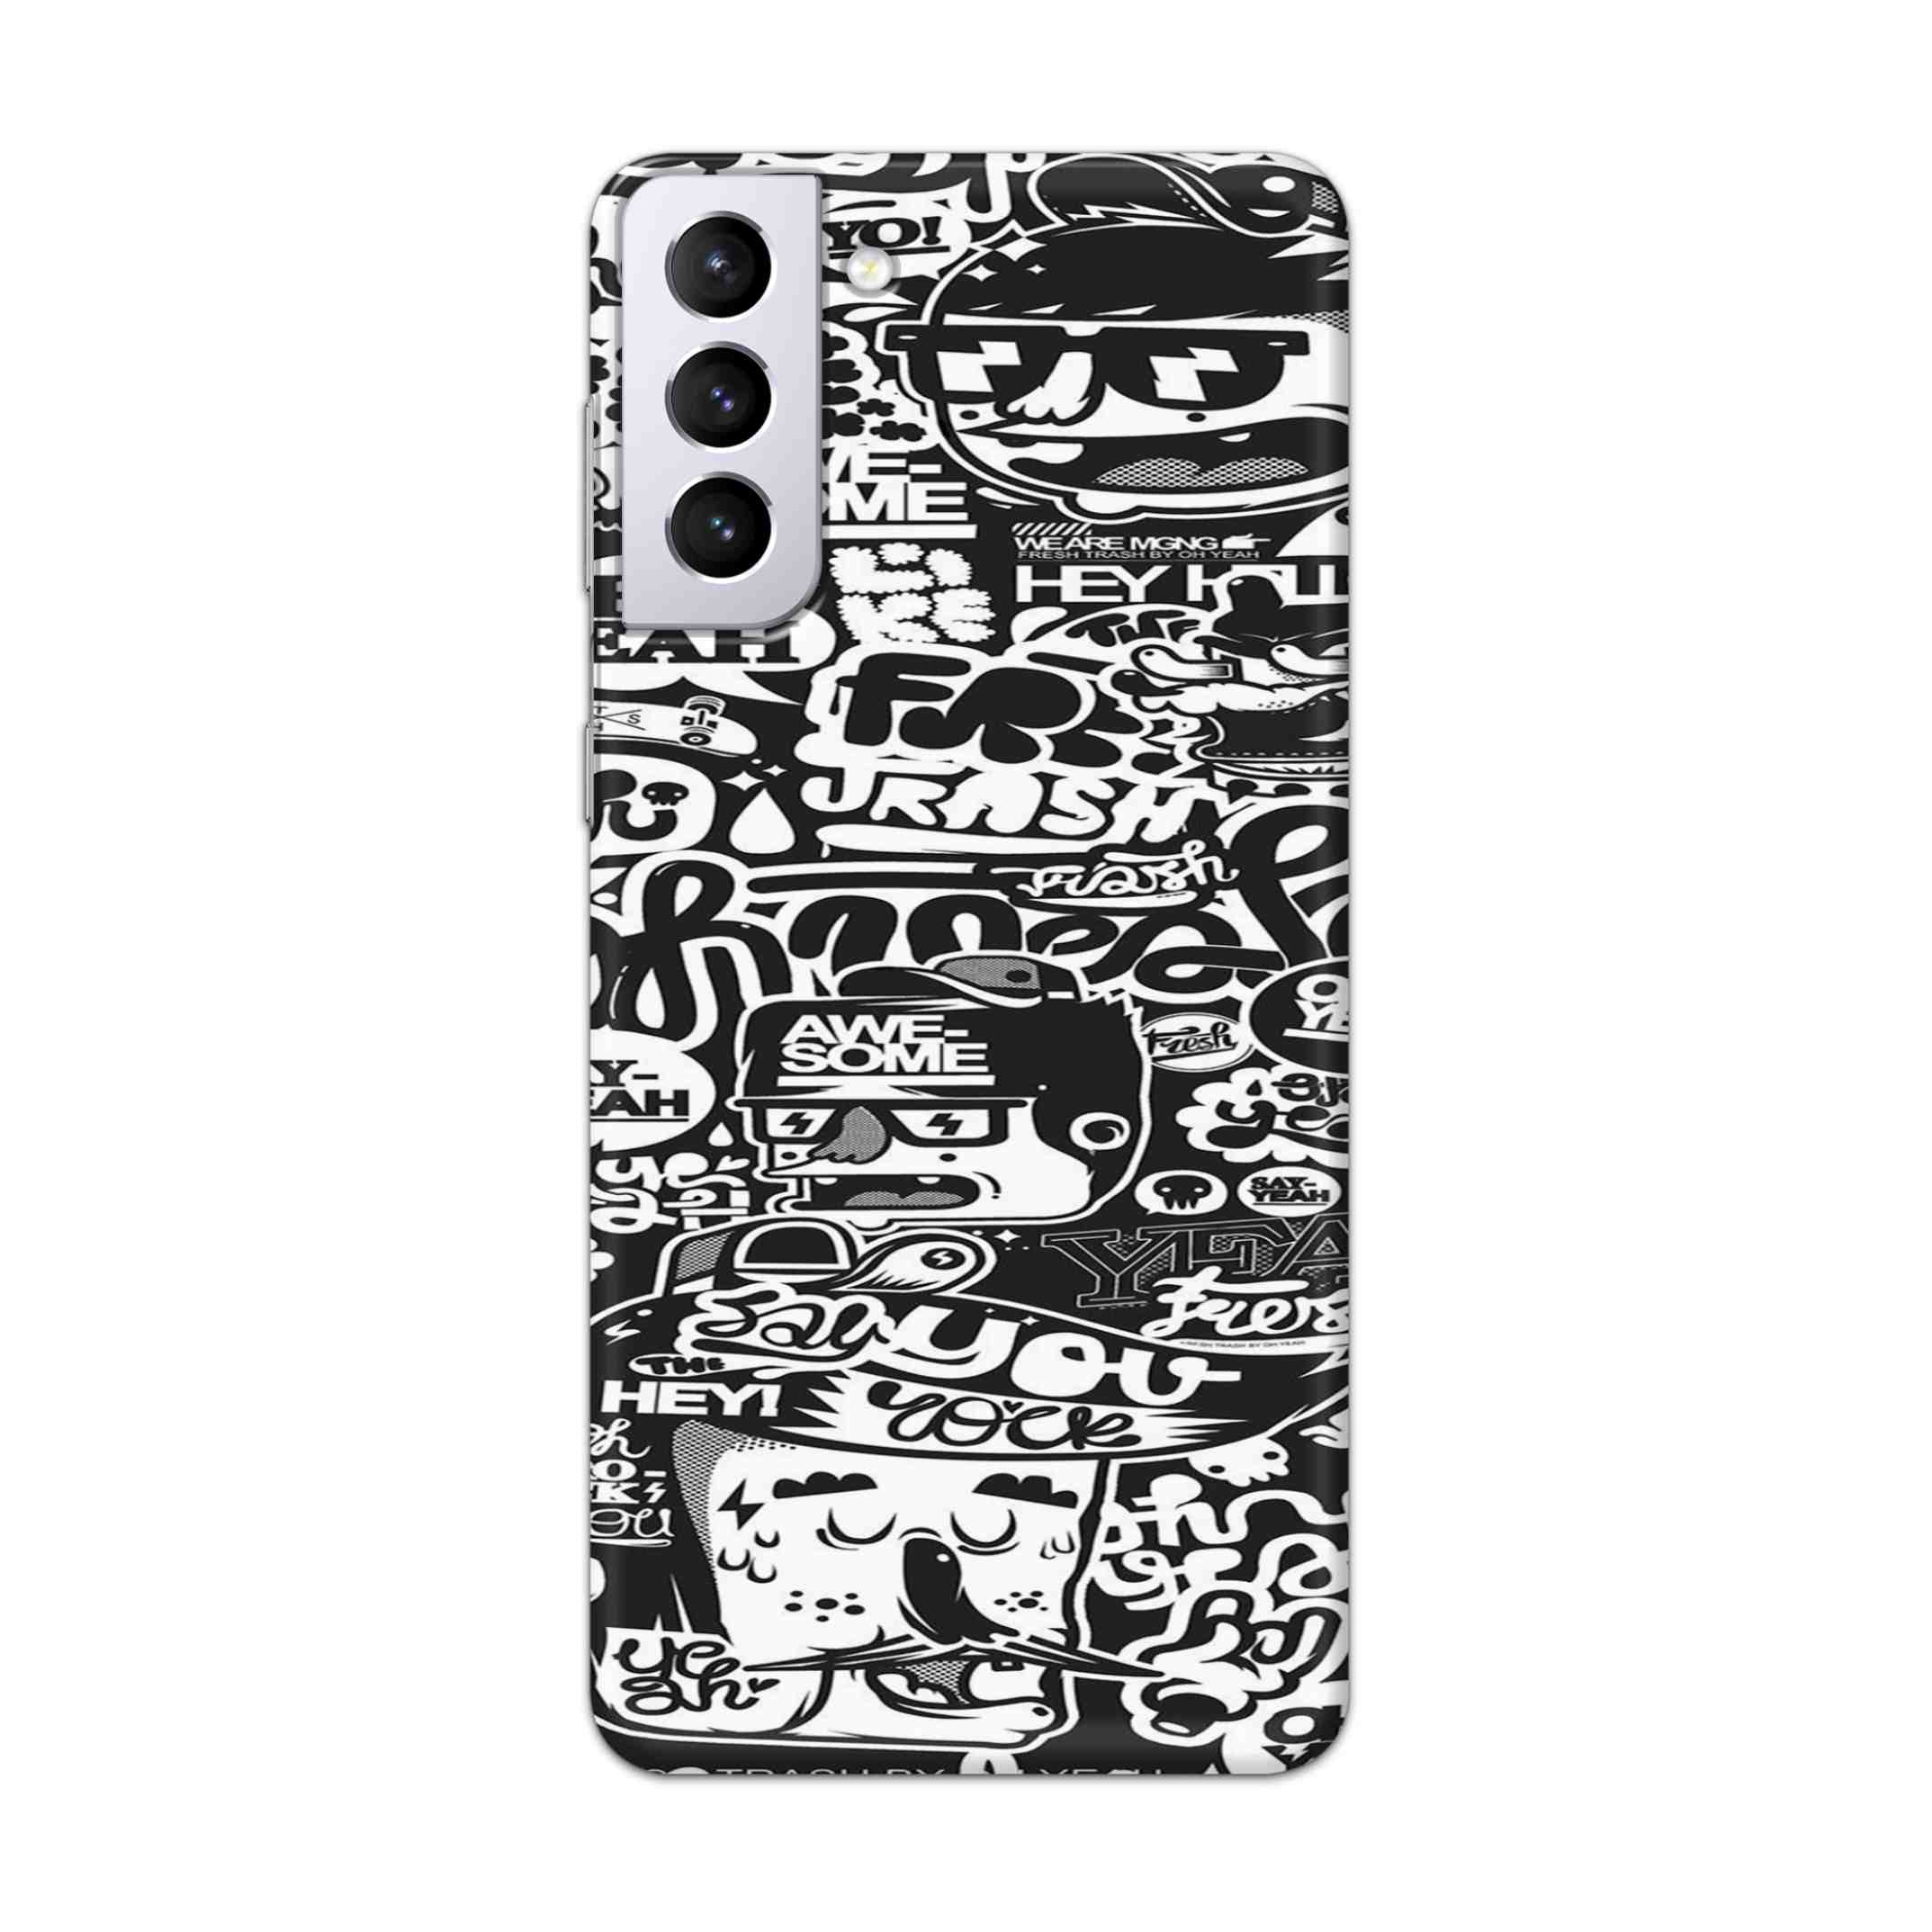 Buy Awesome Hard Back Mobile Phone Case Cover For Samsung Galaxy S21 Plus Online